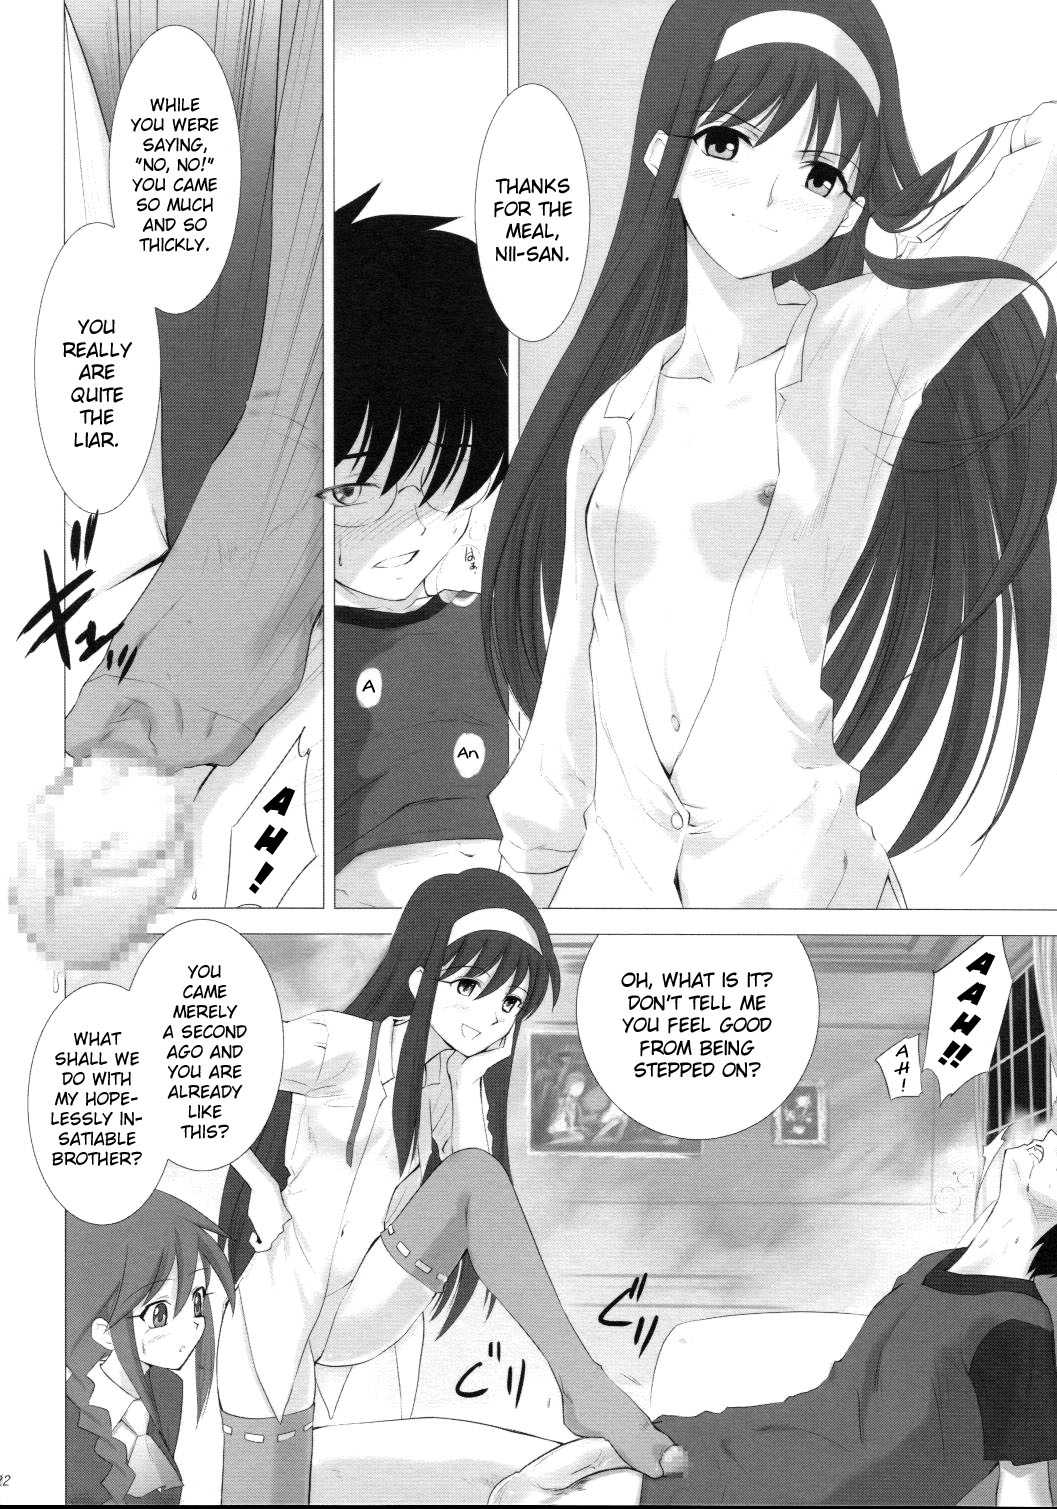 [Crazy Clover Club] Tsukihime Complex 3 &quot;red&quot; (Tsukihime) [English] [Crazy Clover Club]  月姫COMPLEX 3 &quot;red&quot; (月姫)